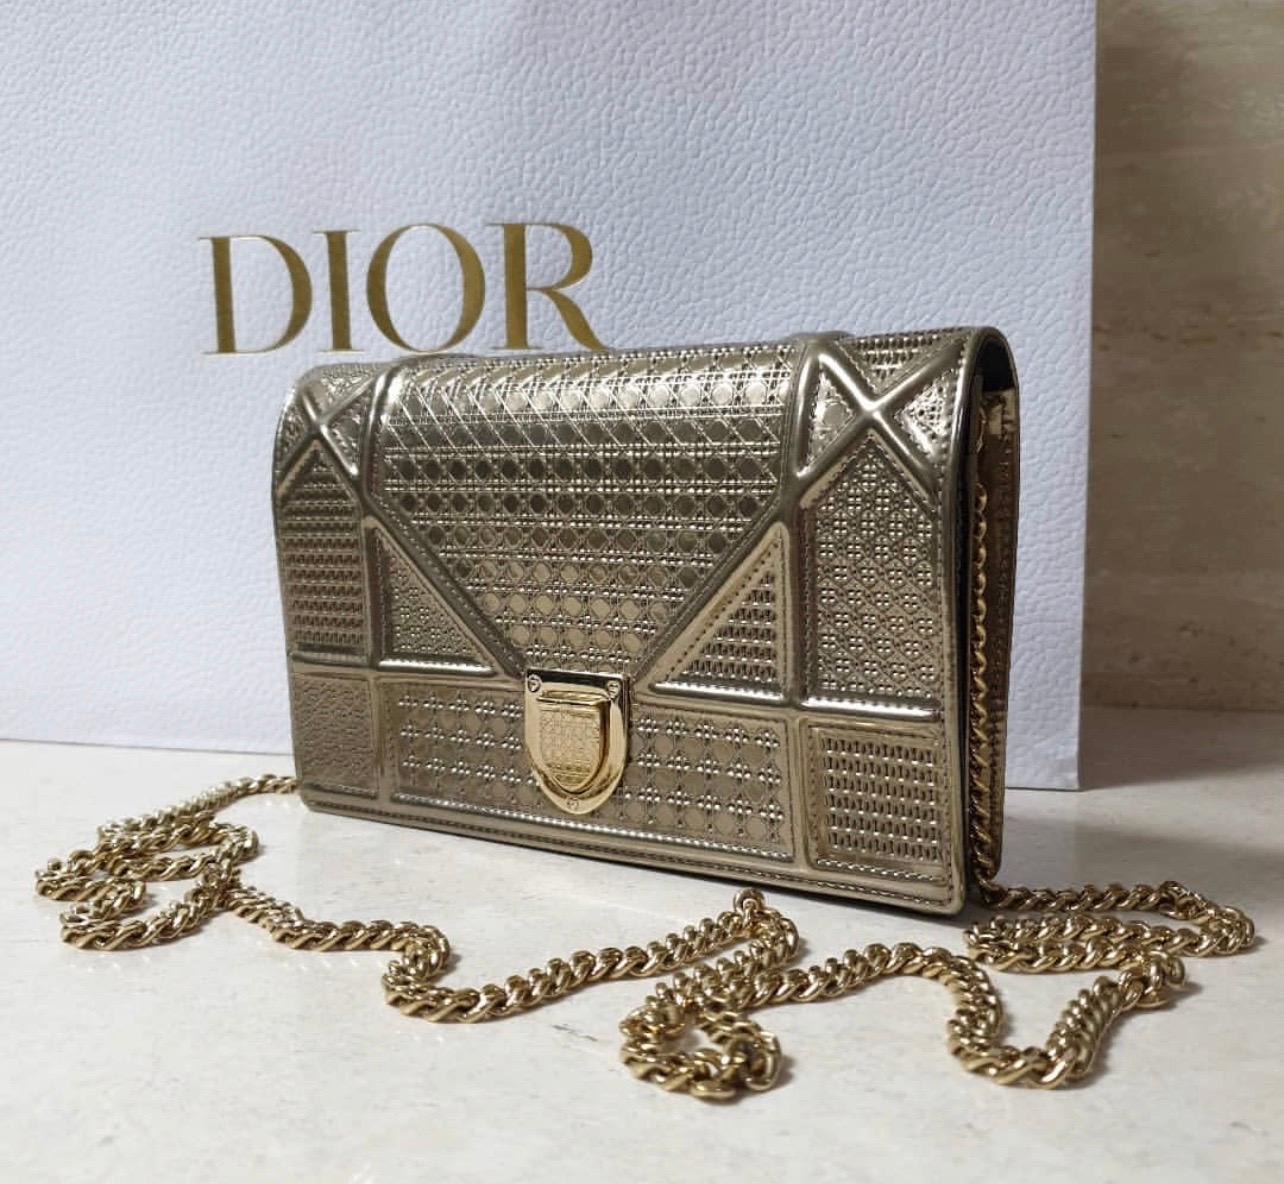 - Christian Dior Mini Diorama bag
- Original gold color veal leather
- Metallic chainlink and flap front clasp
- Dark blue leather lining 
- A chic edition of the iconic model 
- Small model  
- The perfect evening bag

Dust bag included.
